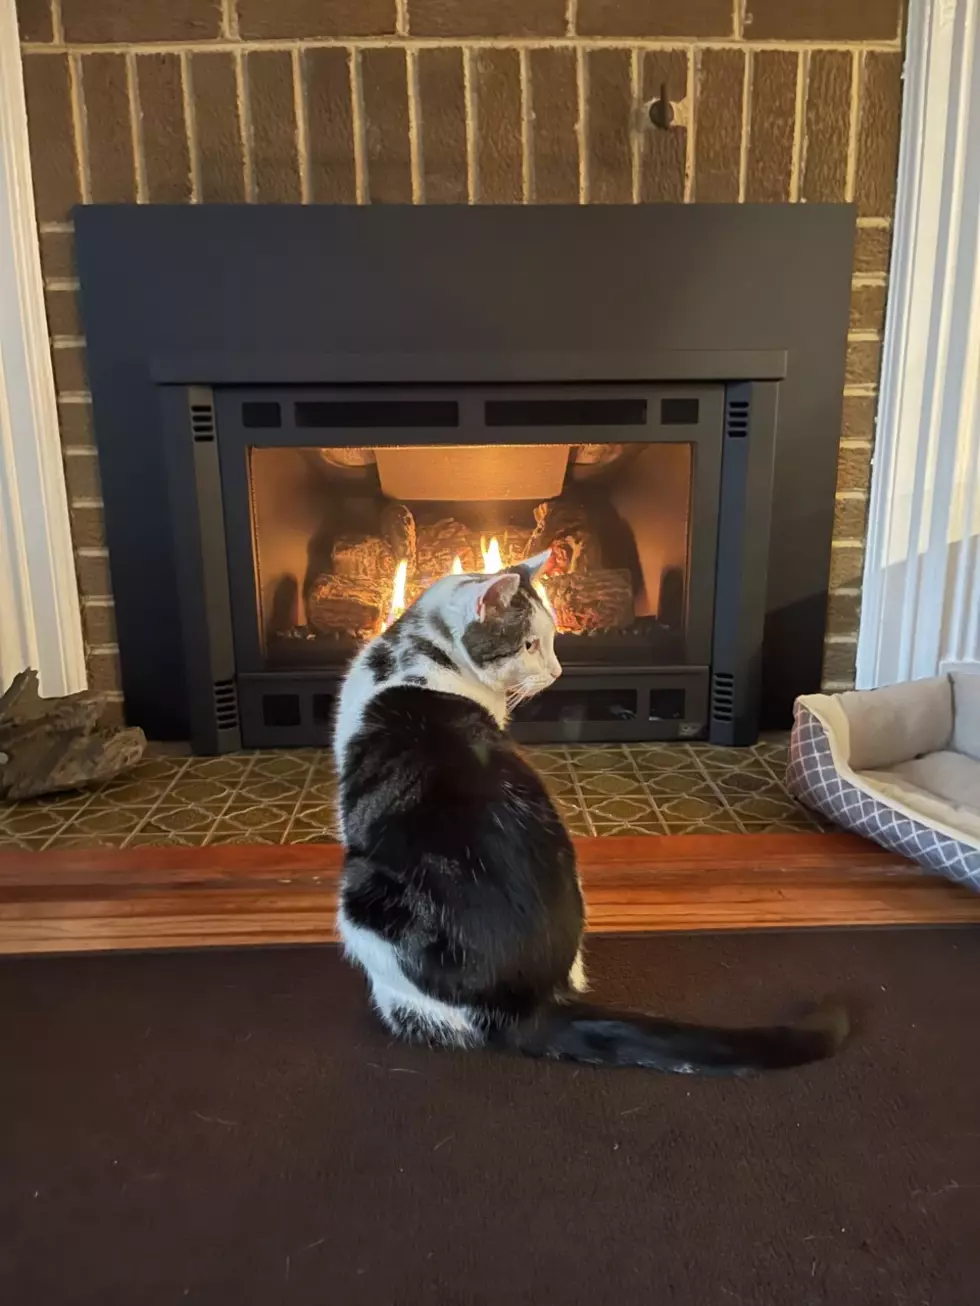 Johnny Marks – My Weekend in 5 Photos ‘New Fireplace’